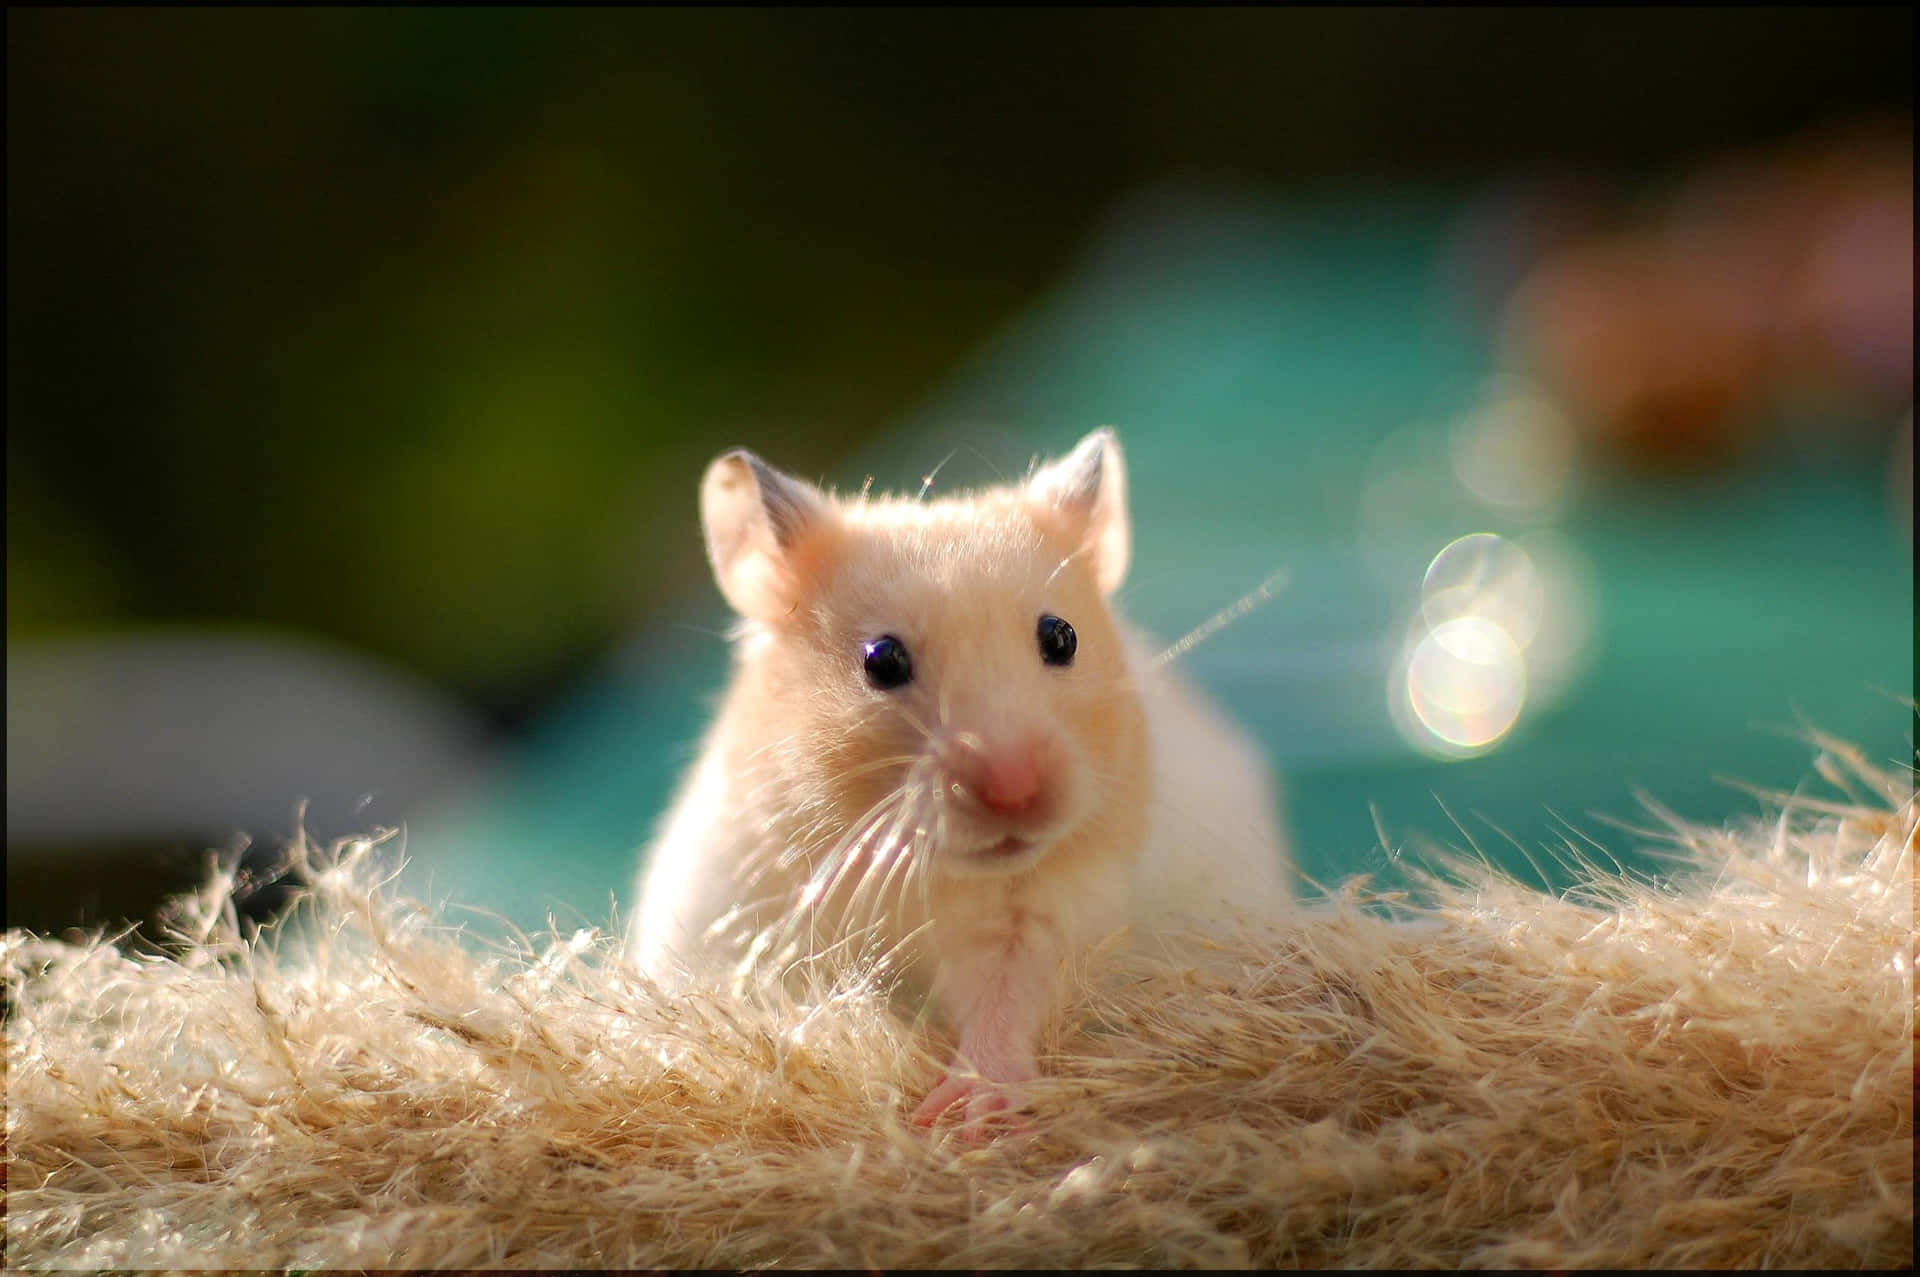 Funny Hamster Wallpapers